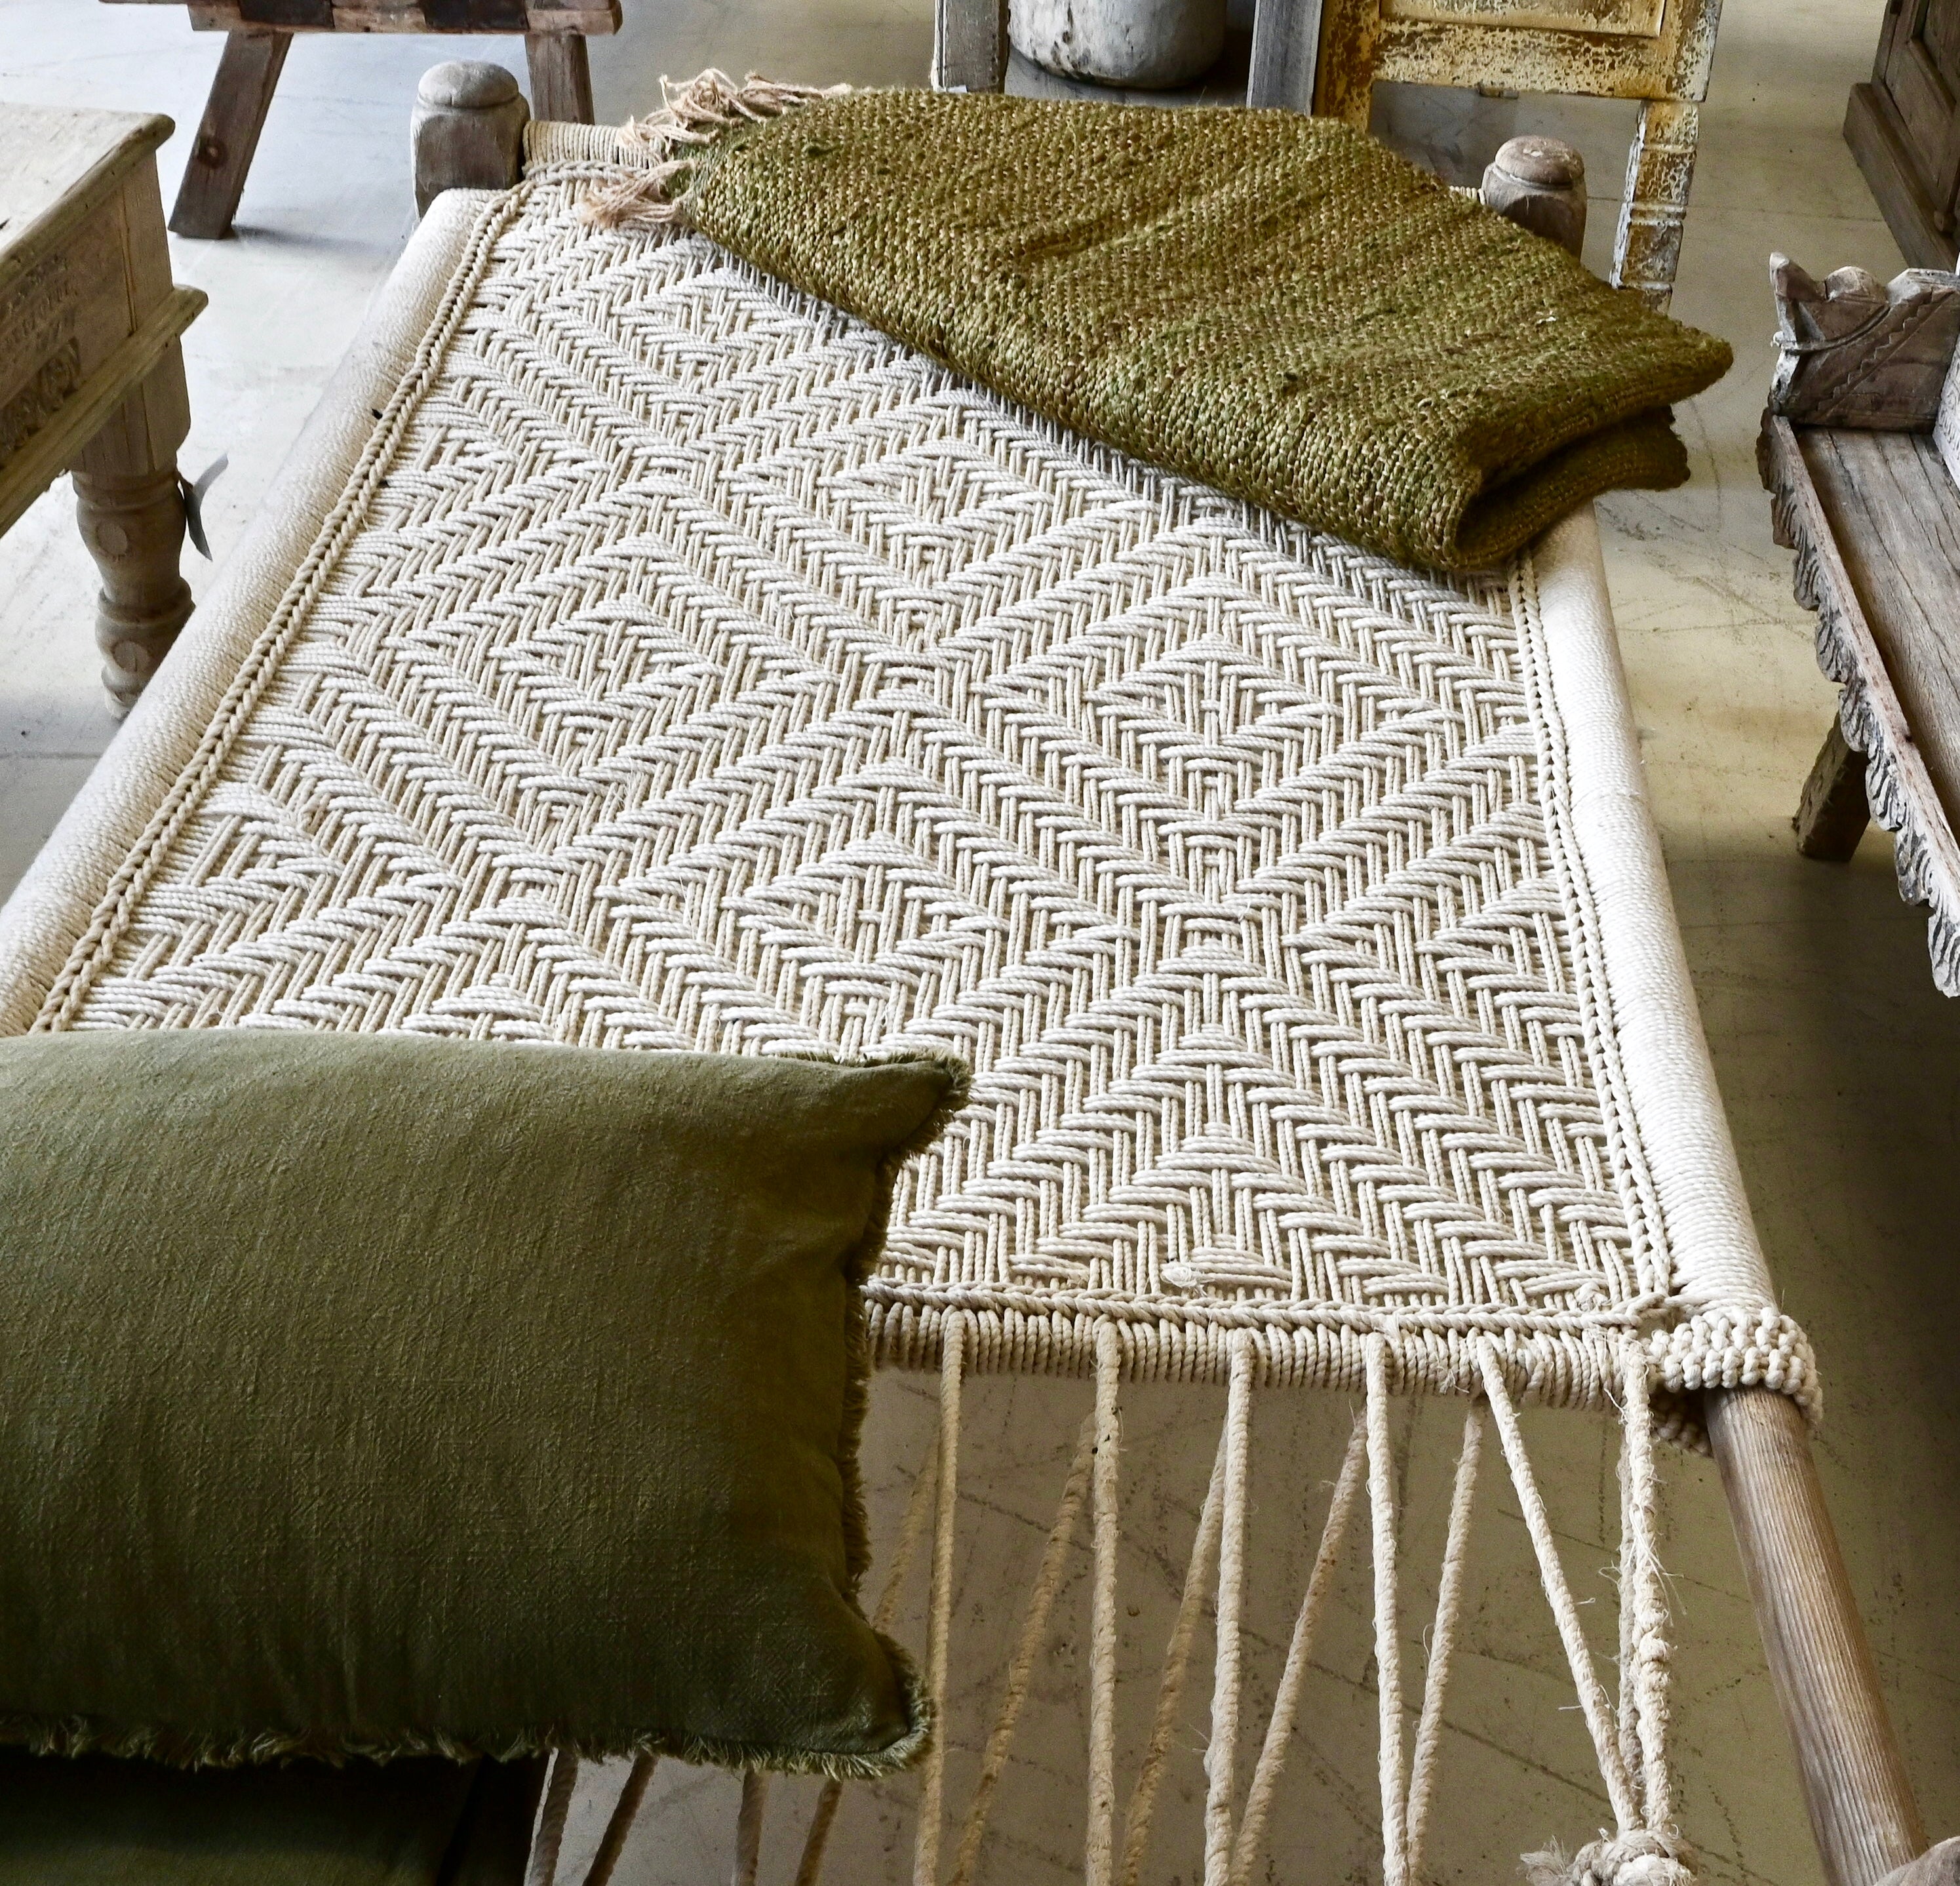 Indian Charpoi rope day bed 273829